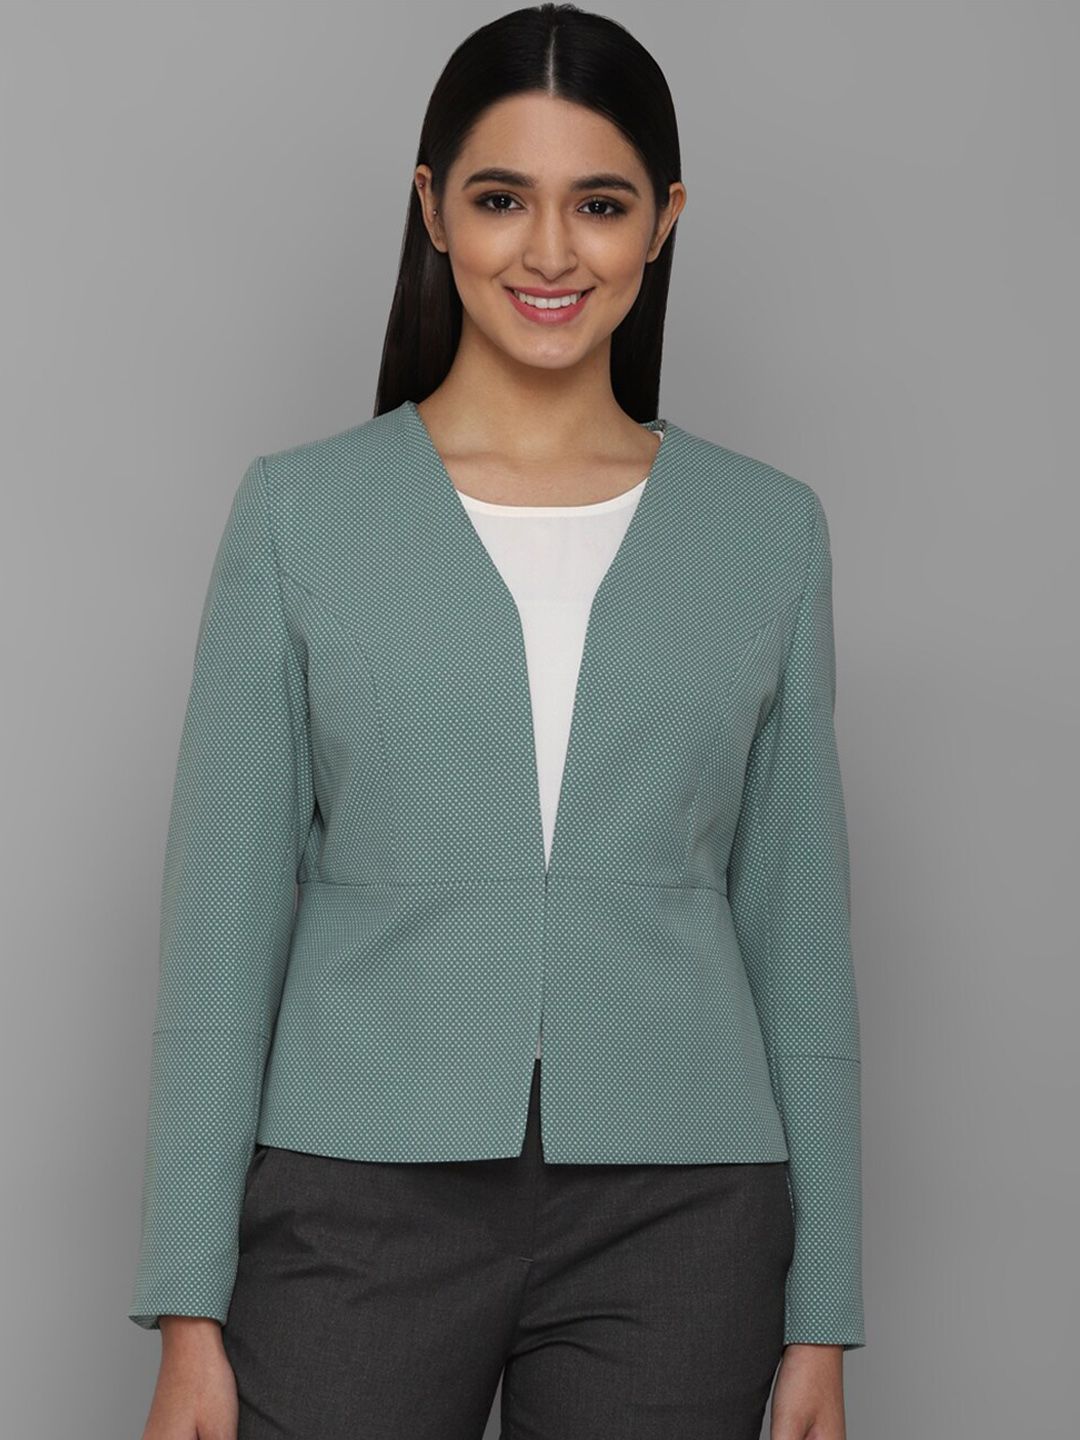 Allen Solly Woman Green Printed Single Breasted Casual Blazer Price in India